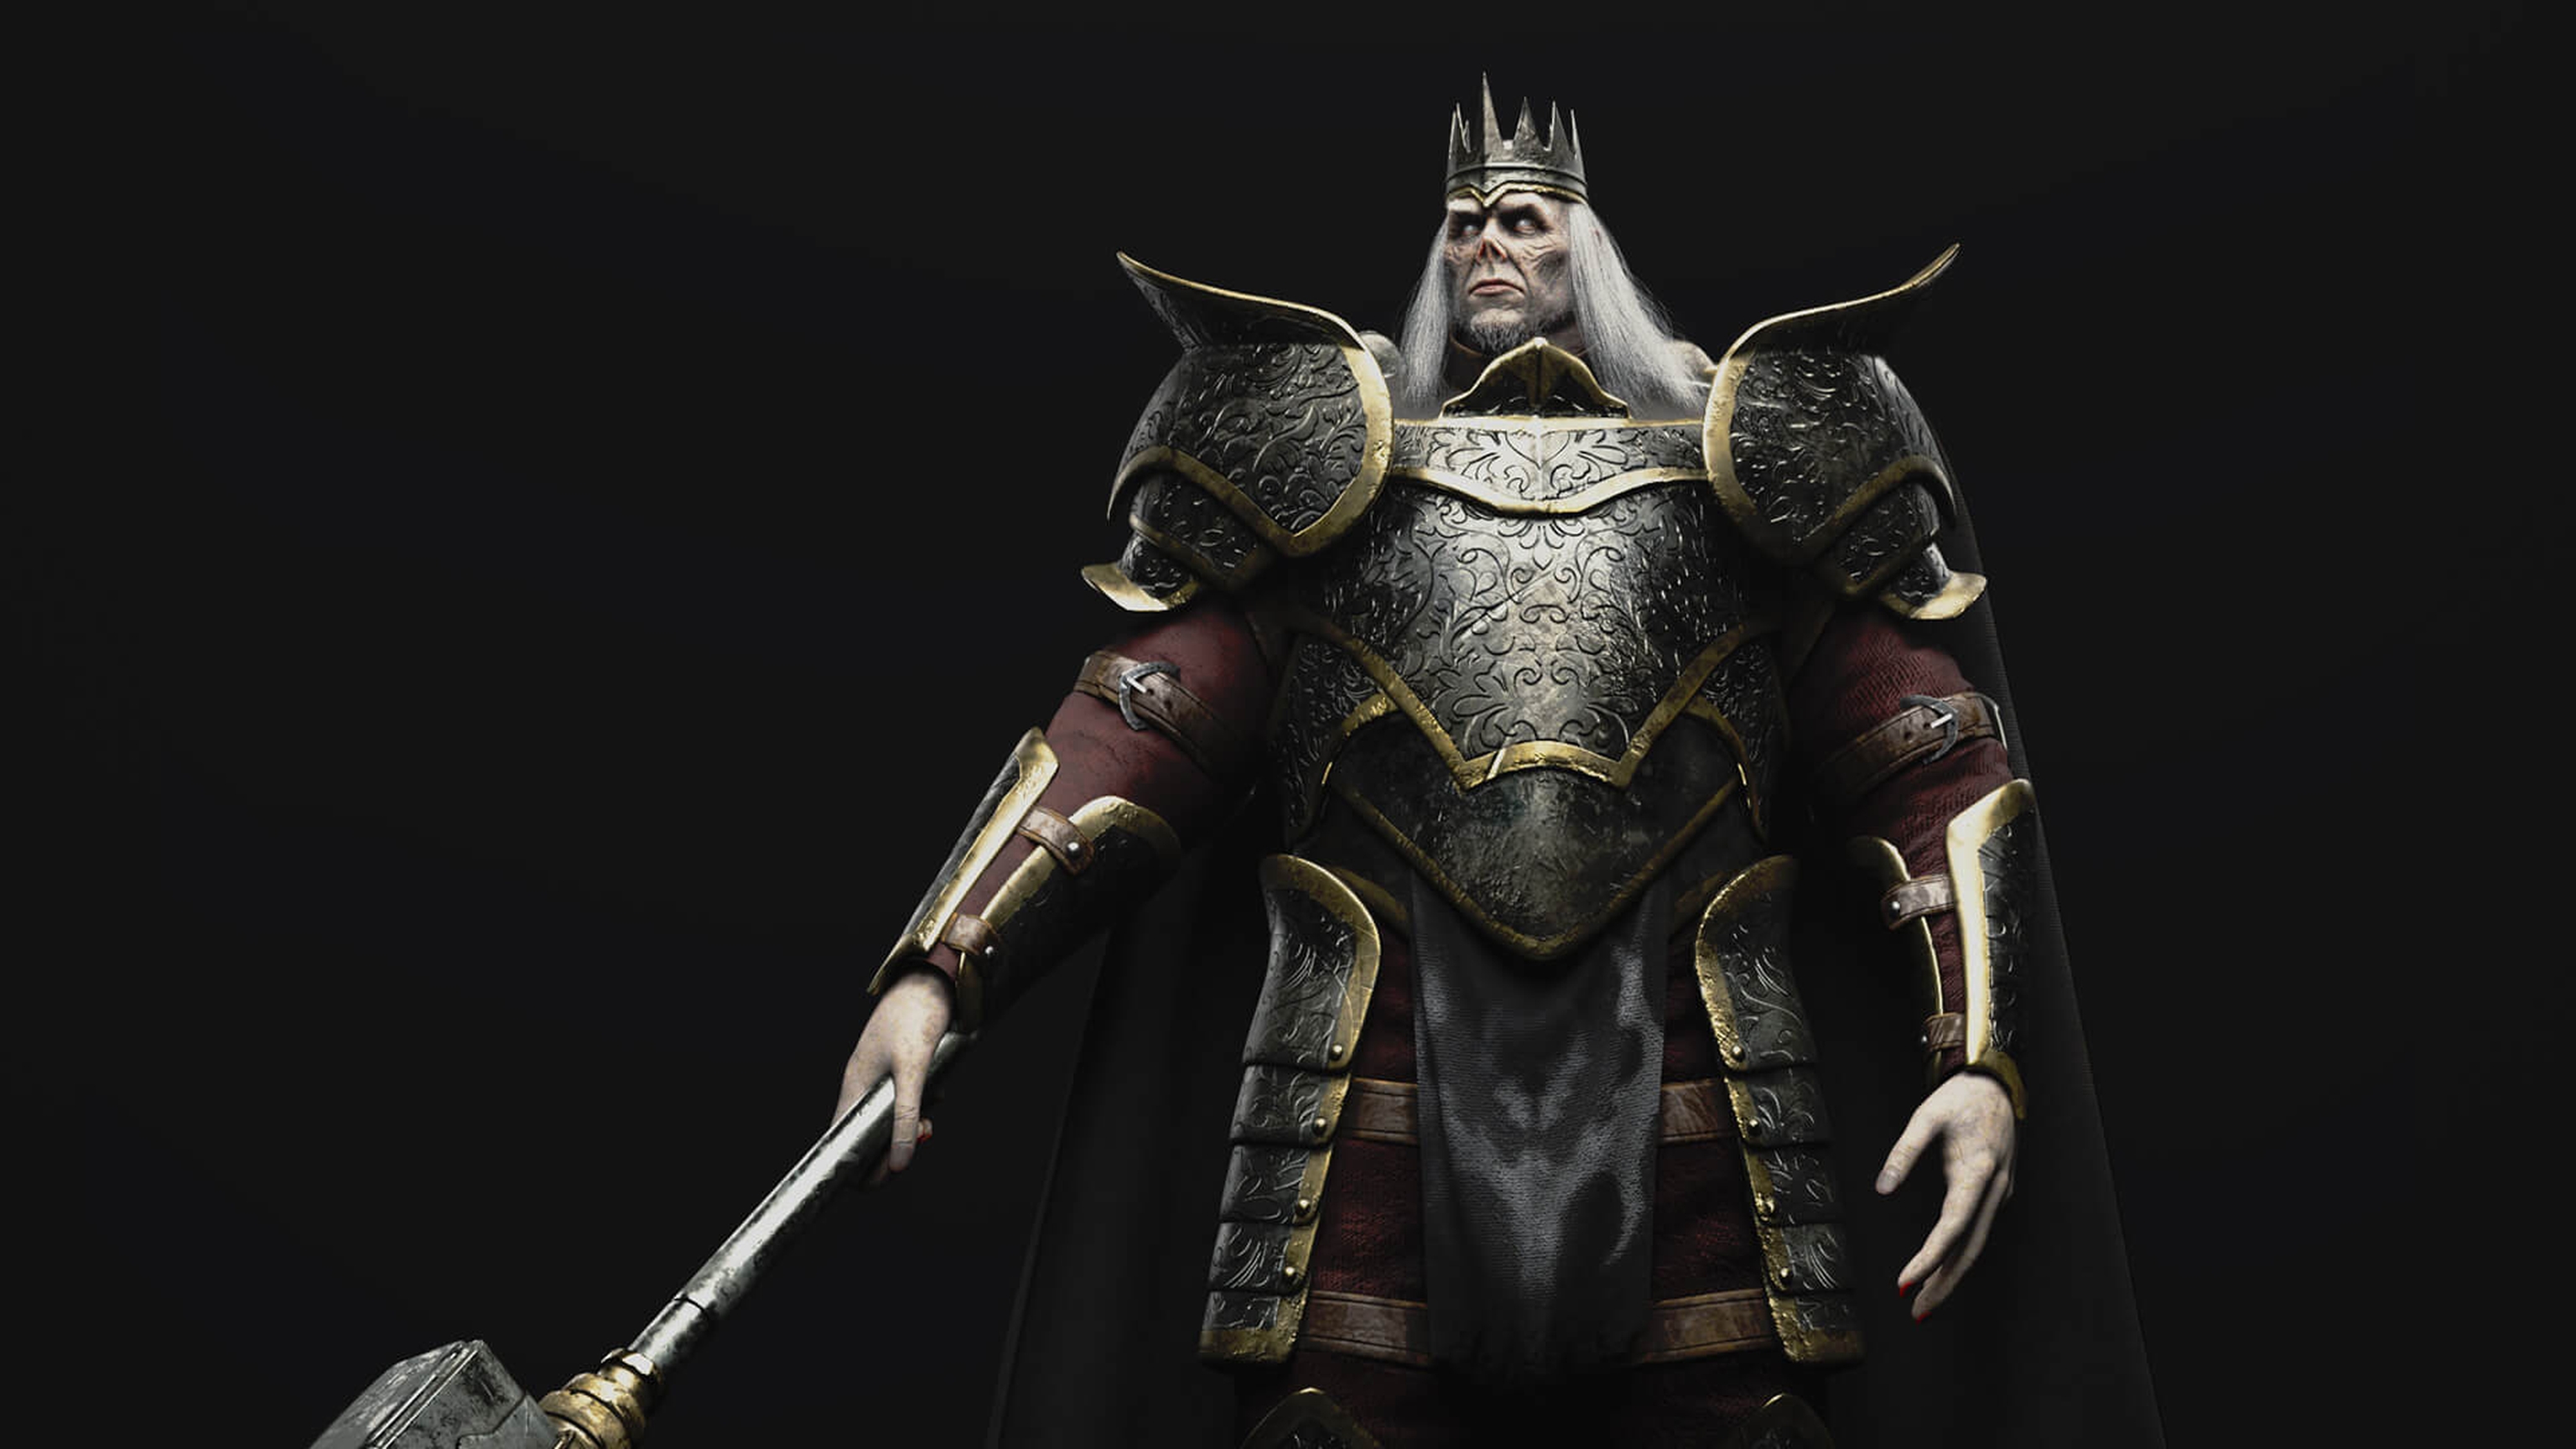 Animated king wearing armour wielding a hammer